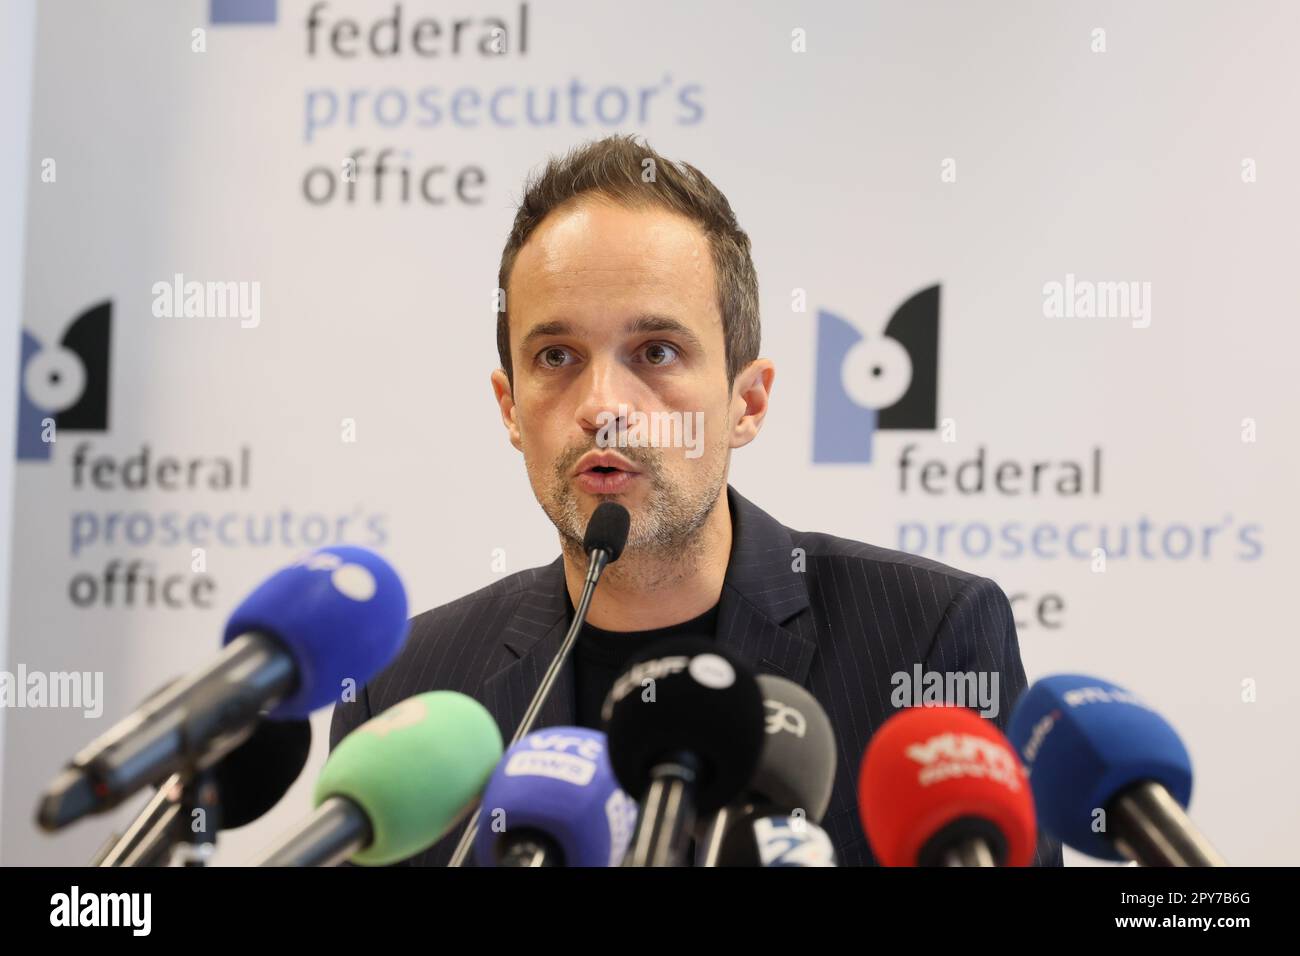 Public prosecutor Antoon Schotsaert pictured at a press conference, in Brussels, regarding a large-scale European operation which took place across several countries earlier this morning, Wednesday 03 May 2023. It concerns a file opened by the Belgian Federal Prosecutor's Office, in collaboration with the Limburg Prosecutor's Office, the Federal Judicial Police, Eurojust, Europol and various countries, in particular Italy. This operation targeted more than a hundred suspected members of the Calabrian mafia. More than 20 searches were carried out in Belgium. BELGA PHOTO BENOIT DOPPAGNE Stock Photo